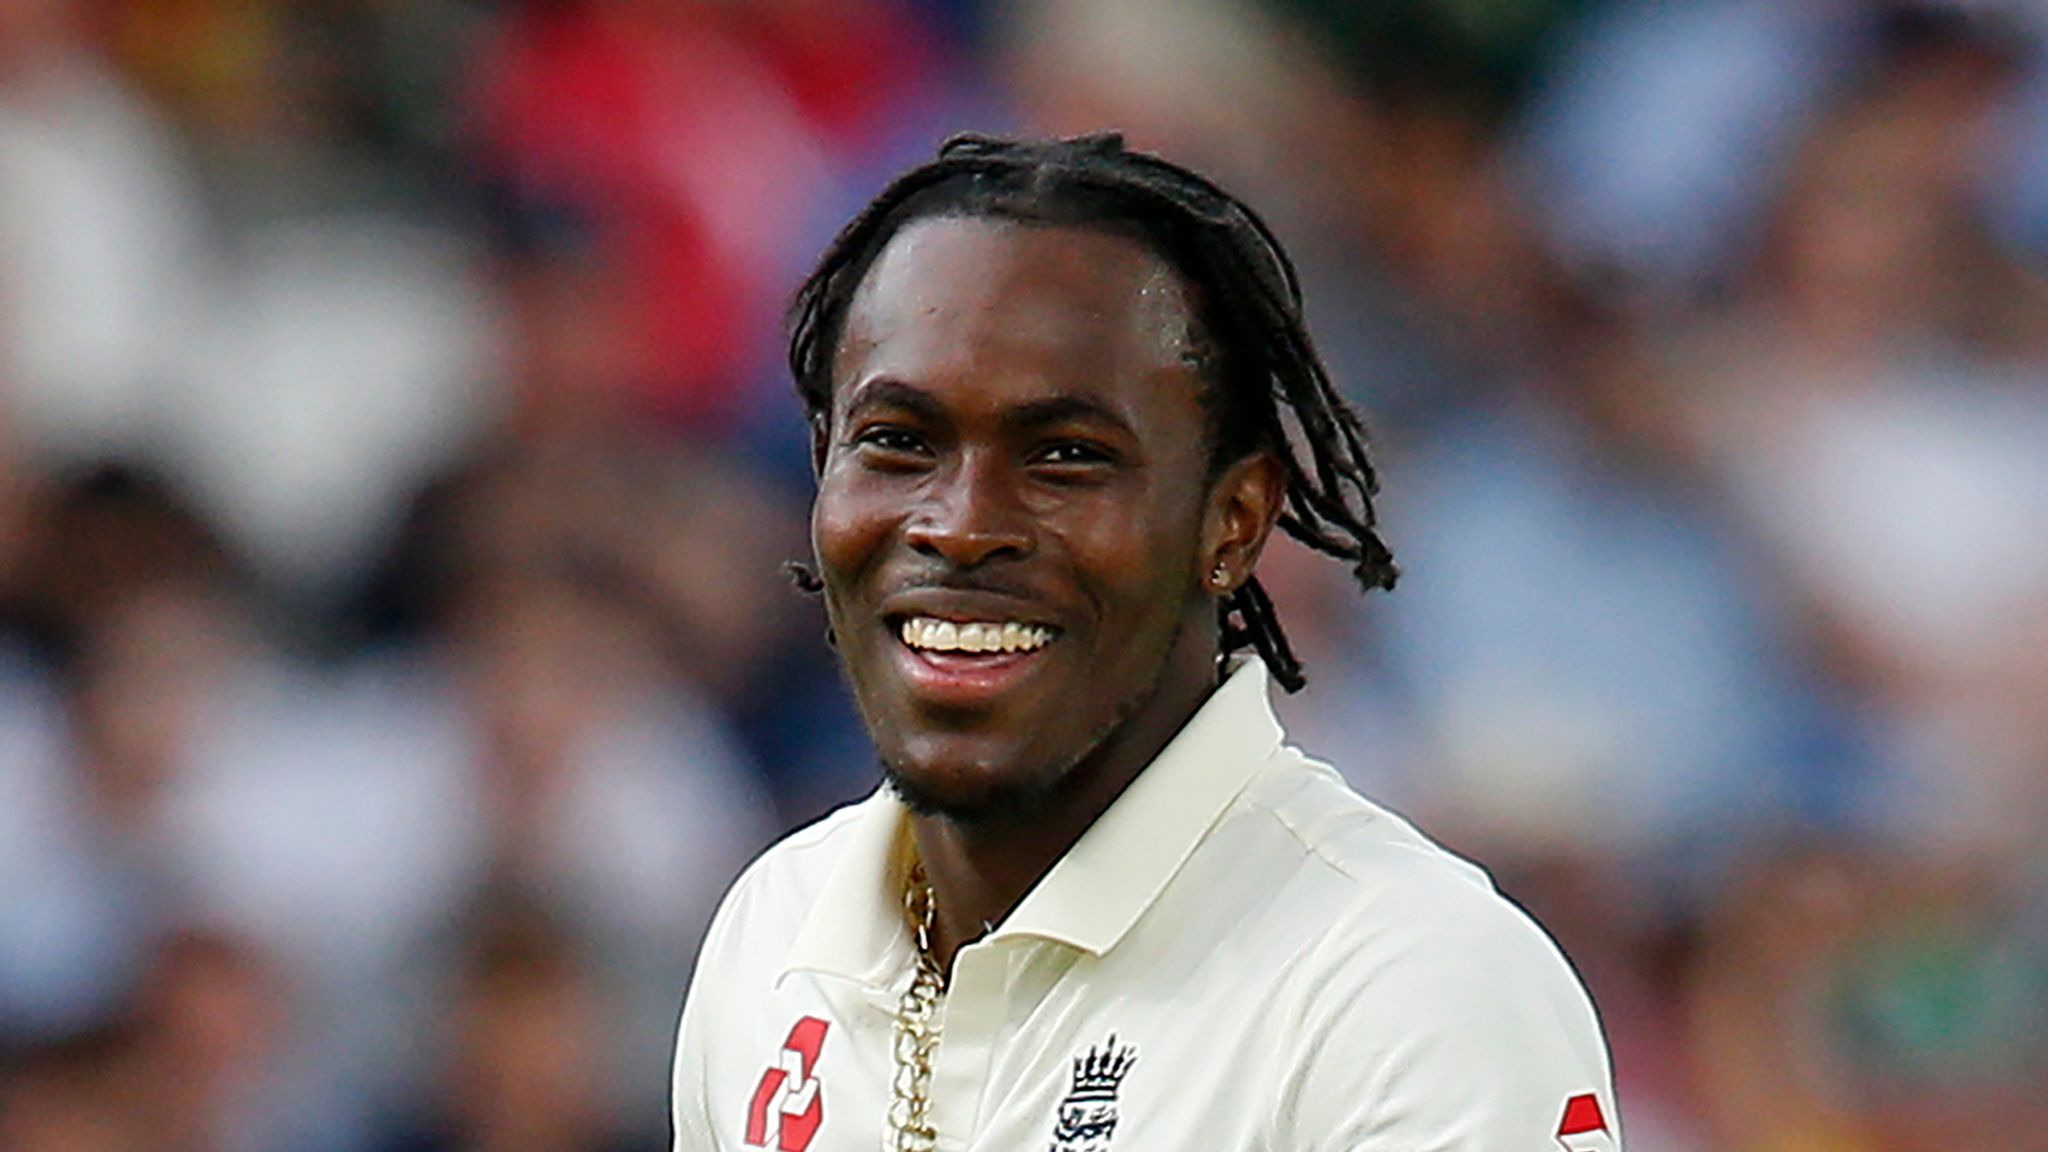 England's Jofra Archer out of Ashes and T20 World Cup